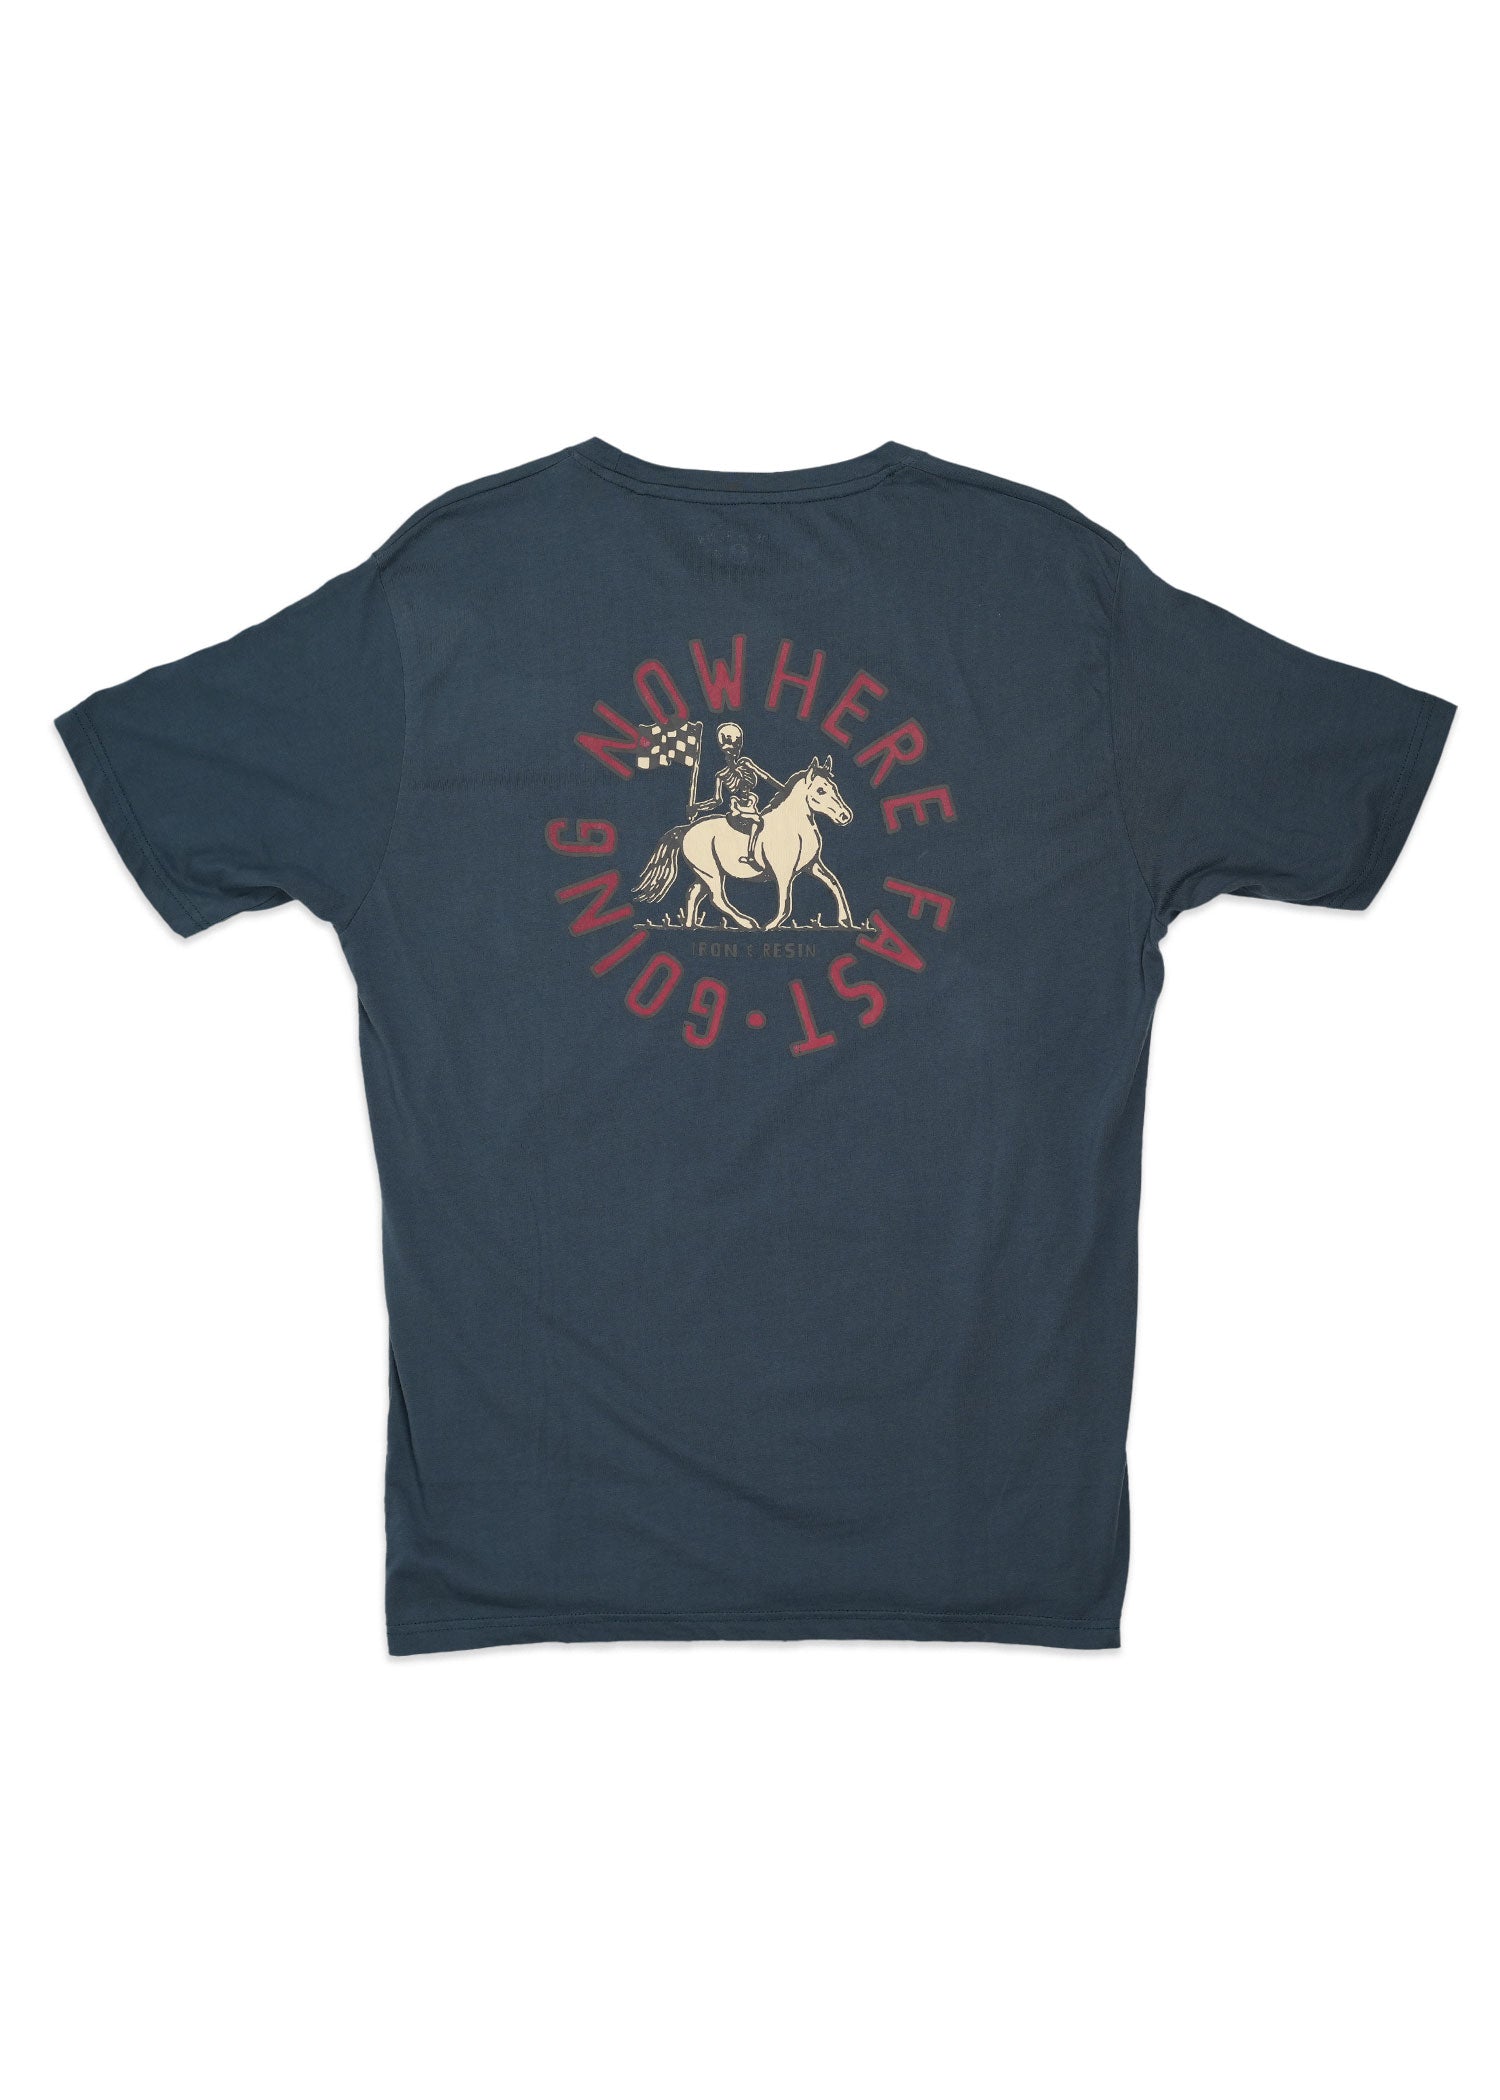 The Newest Detail Dad Pocket T-Shirt | The Rag Company Navy Blue / Small